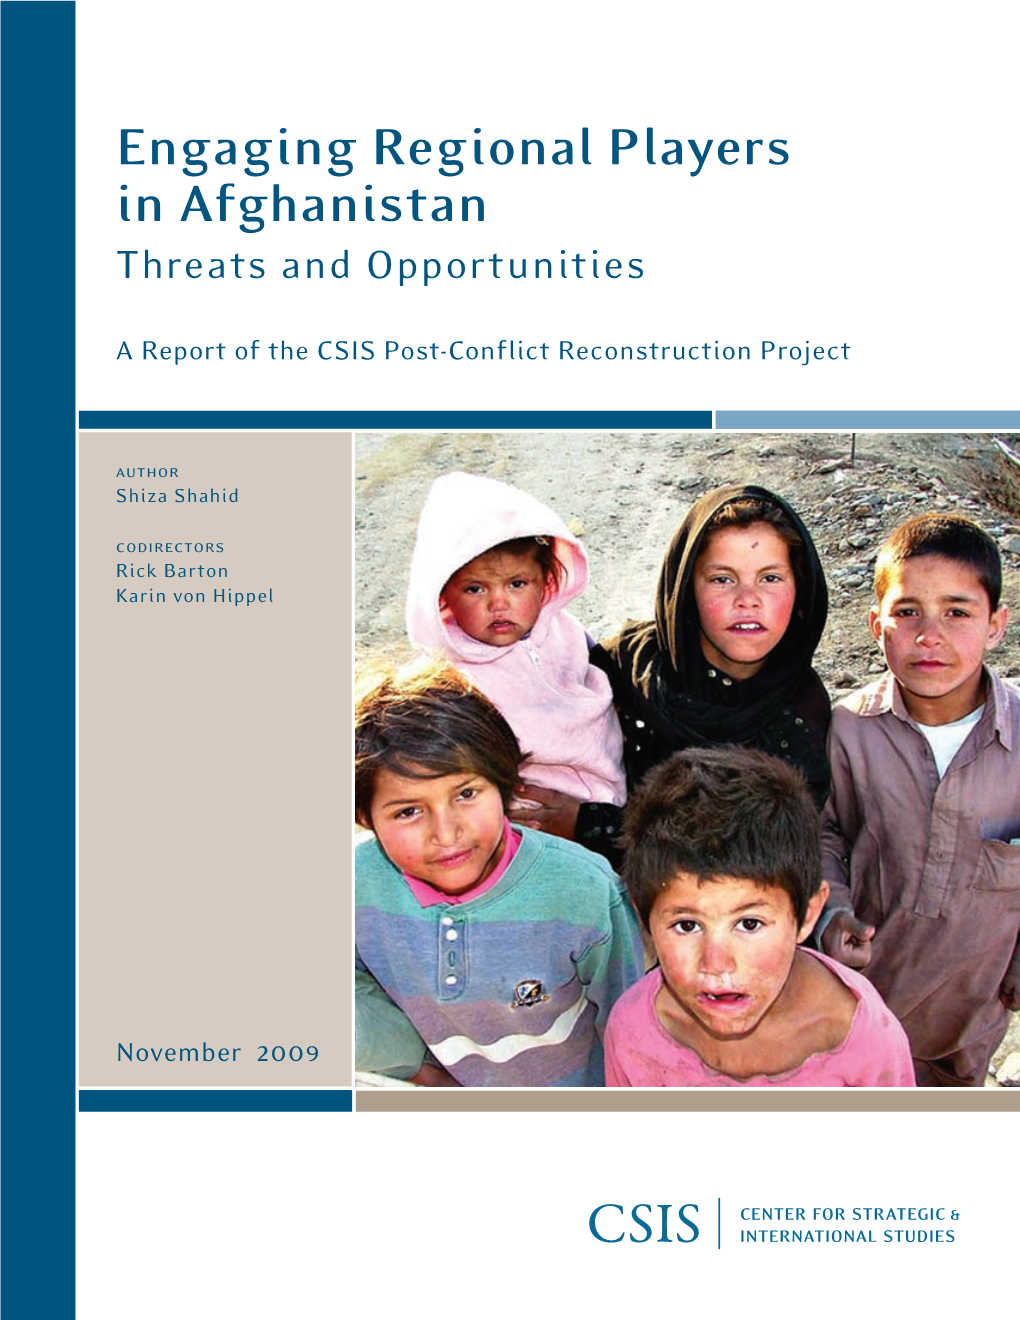 Engaging Regional Players in Afghanistan Threats and Opportunities